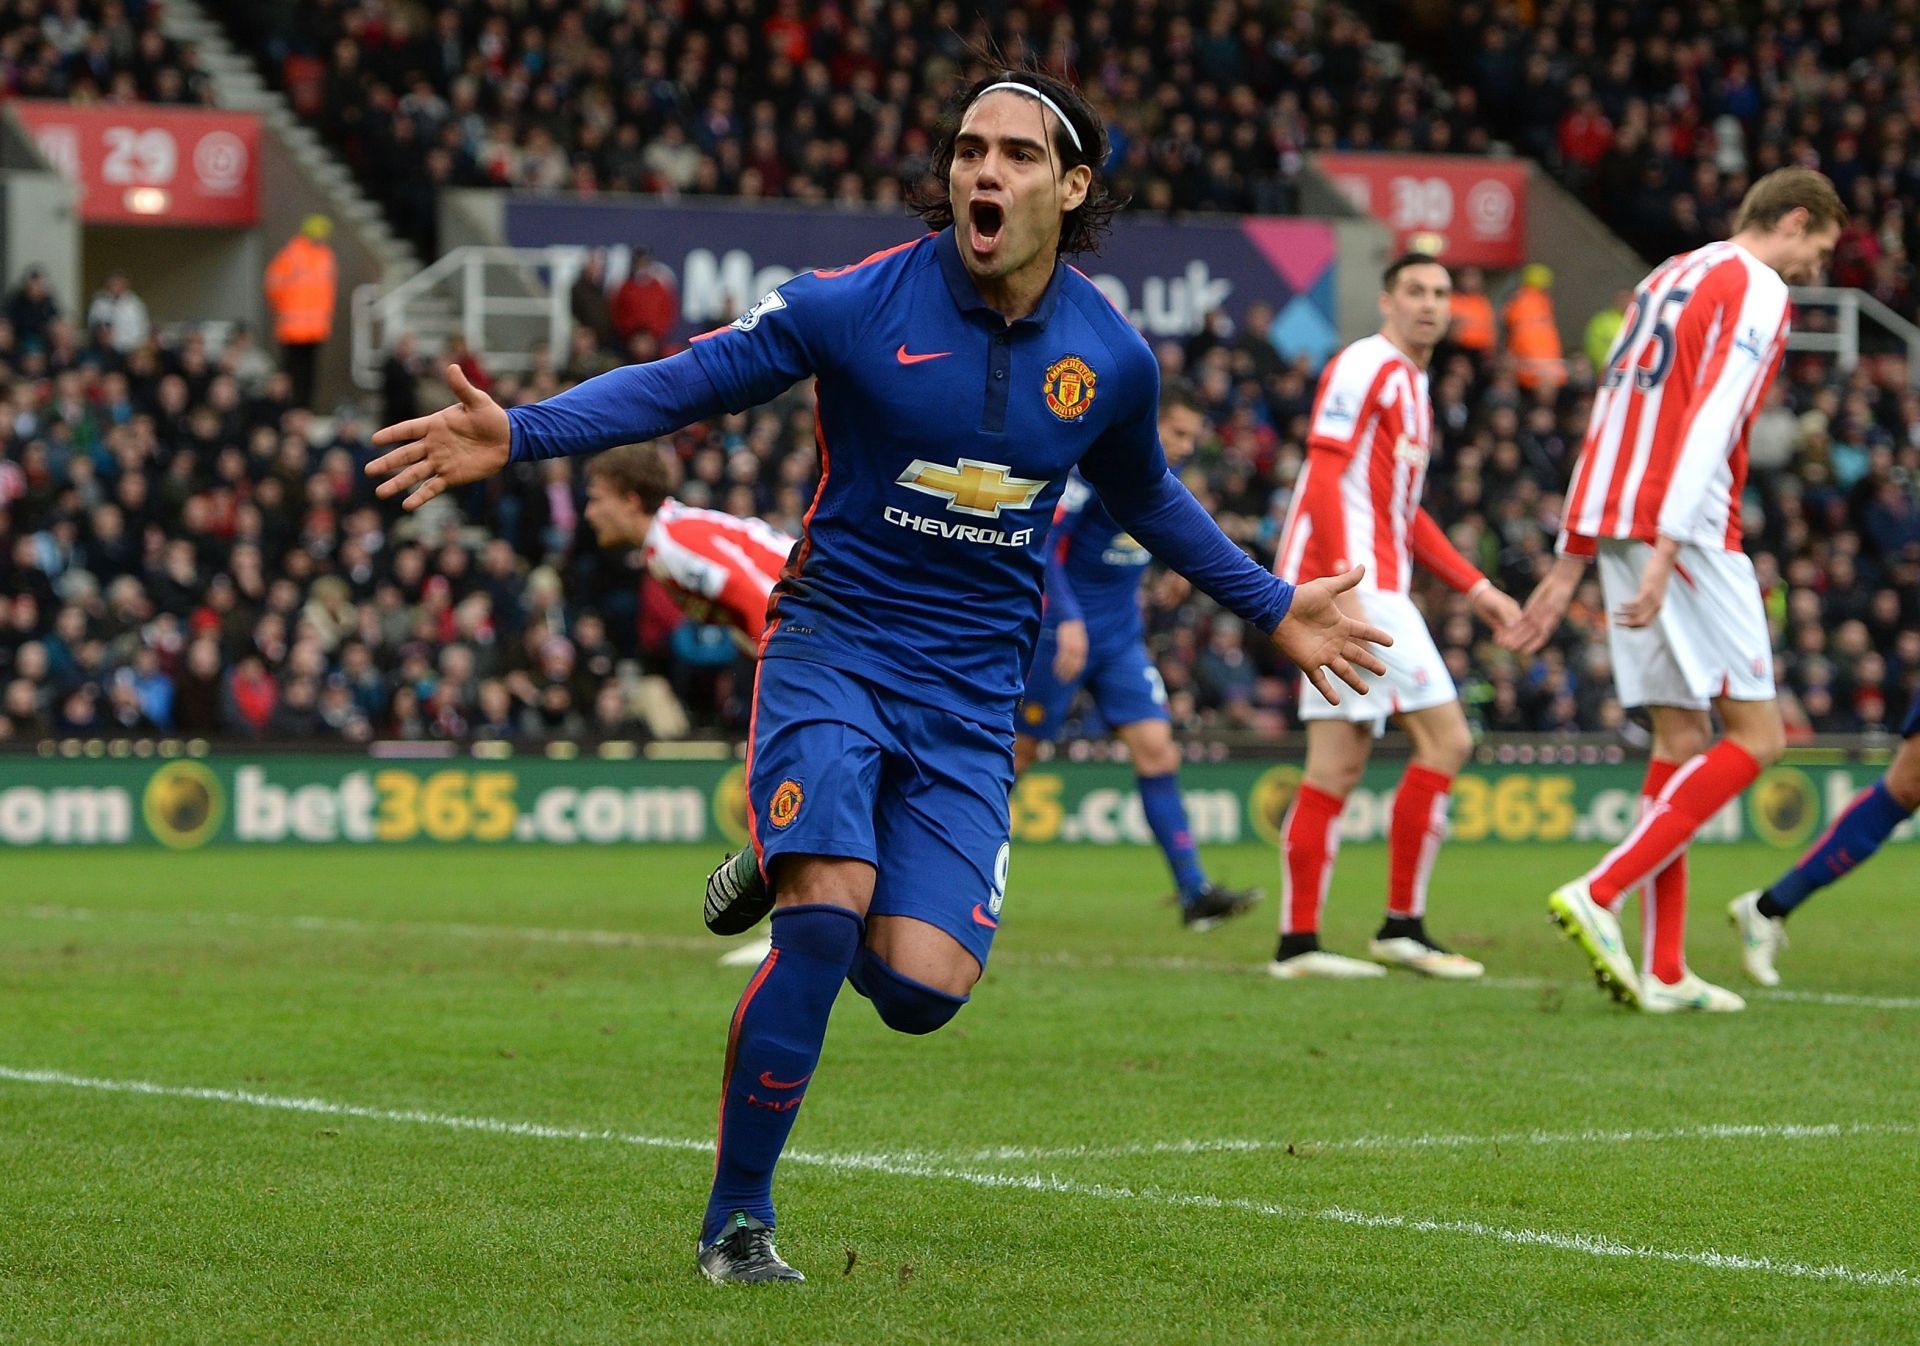 A rare happy moment for Falcao at Manchester United.